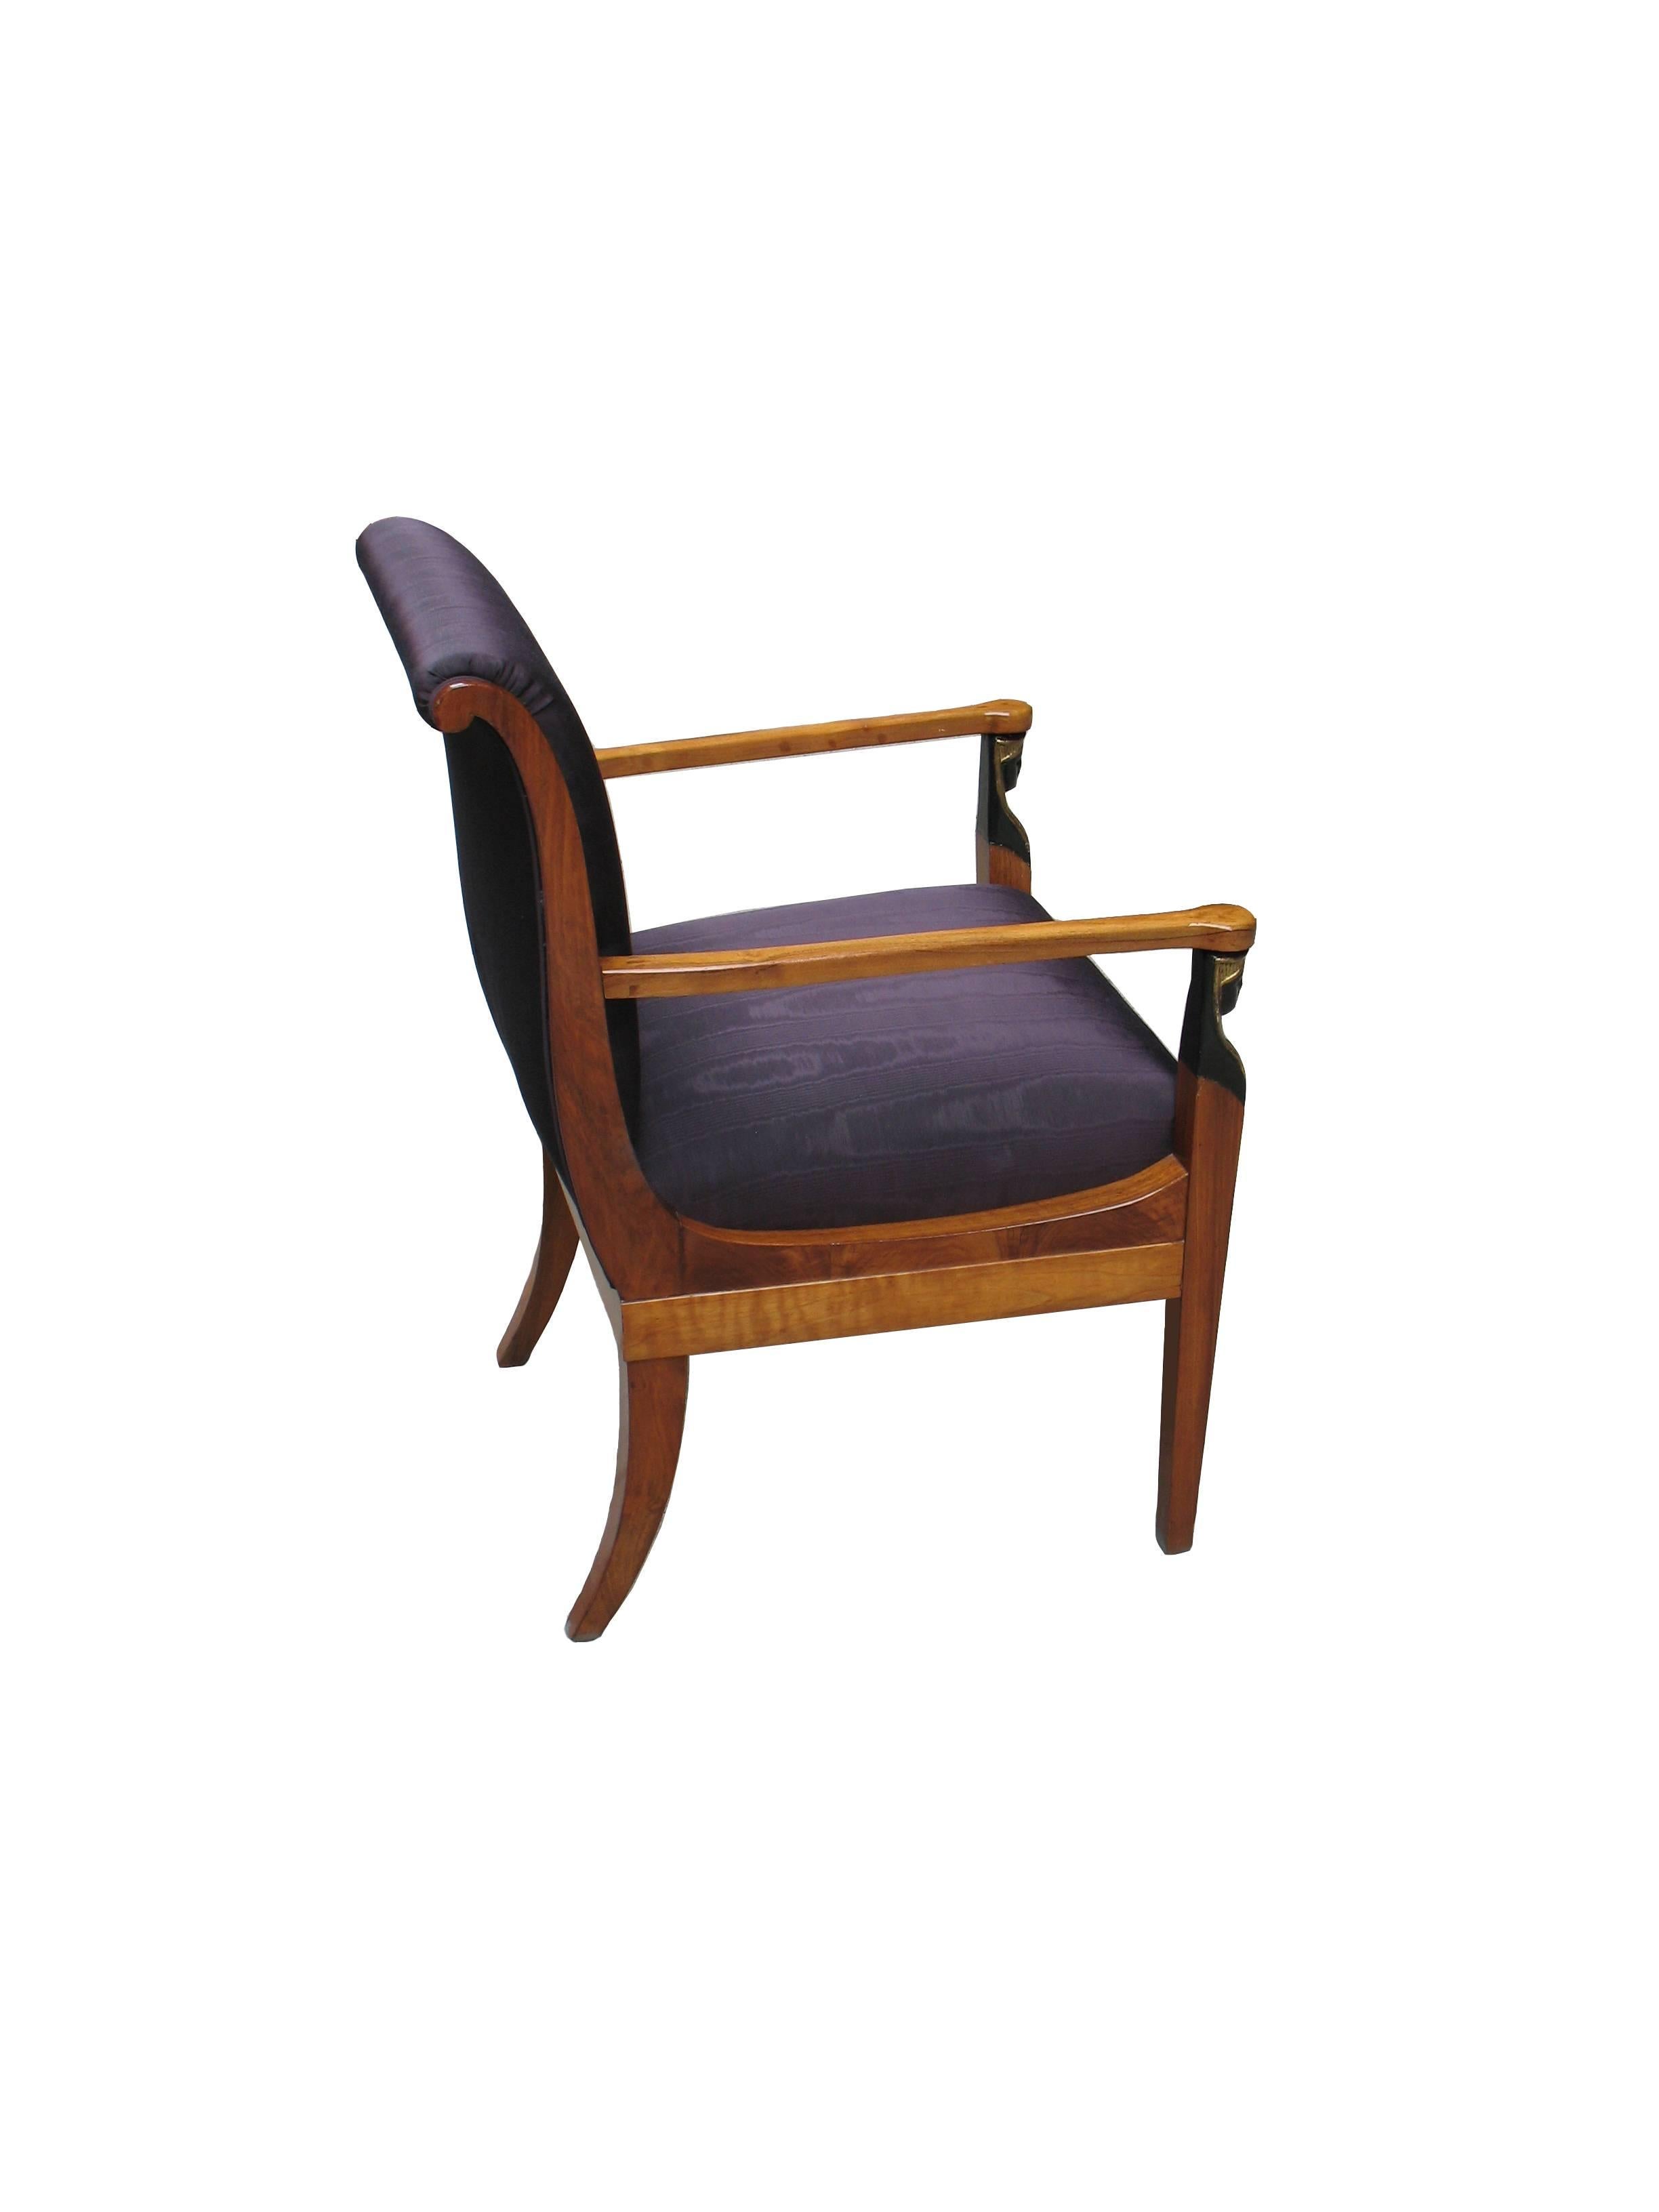 This South German Biedermeier armchair, exemplary designed with straight tail, arms, frontlegs, outbent padded seatback and saber legs, features ebonized and parcel - gilt Egyptian uprights and verifies the Classical Antiquity inspirations into the